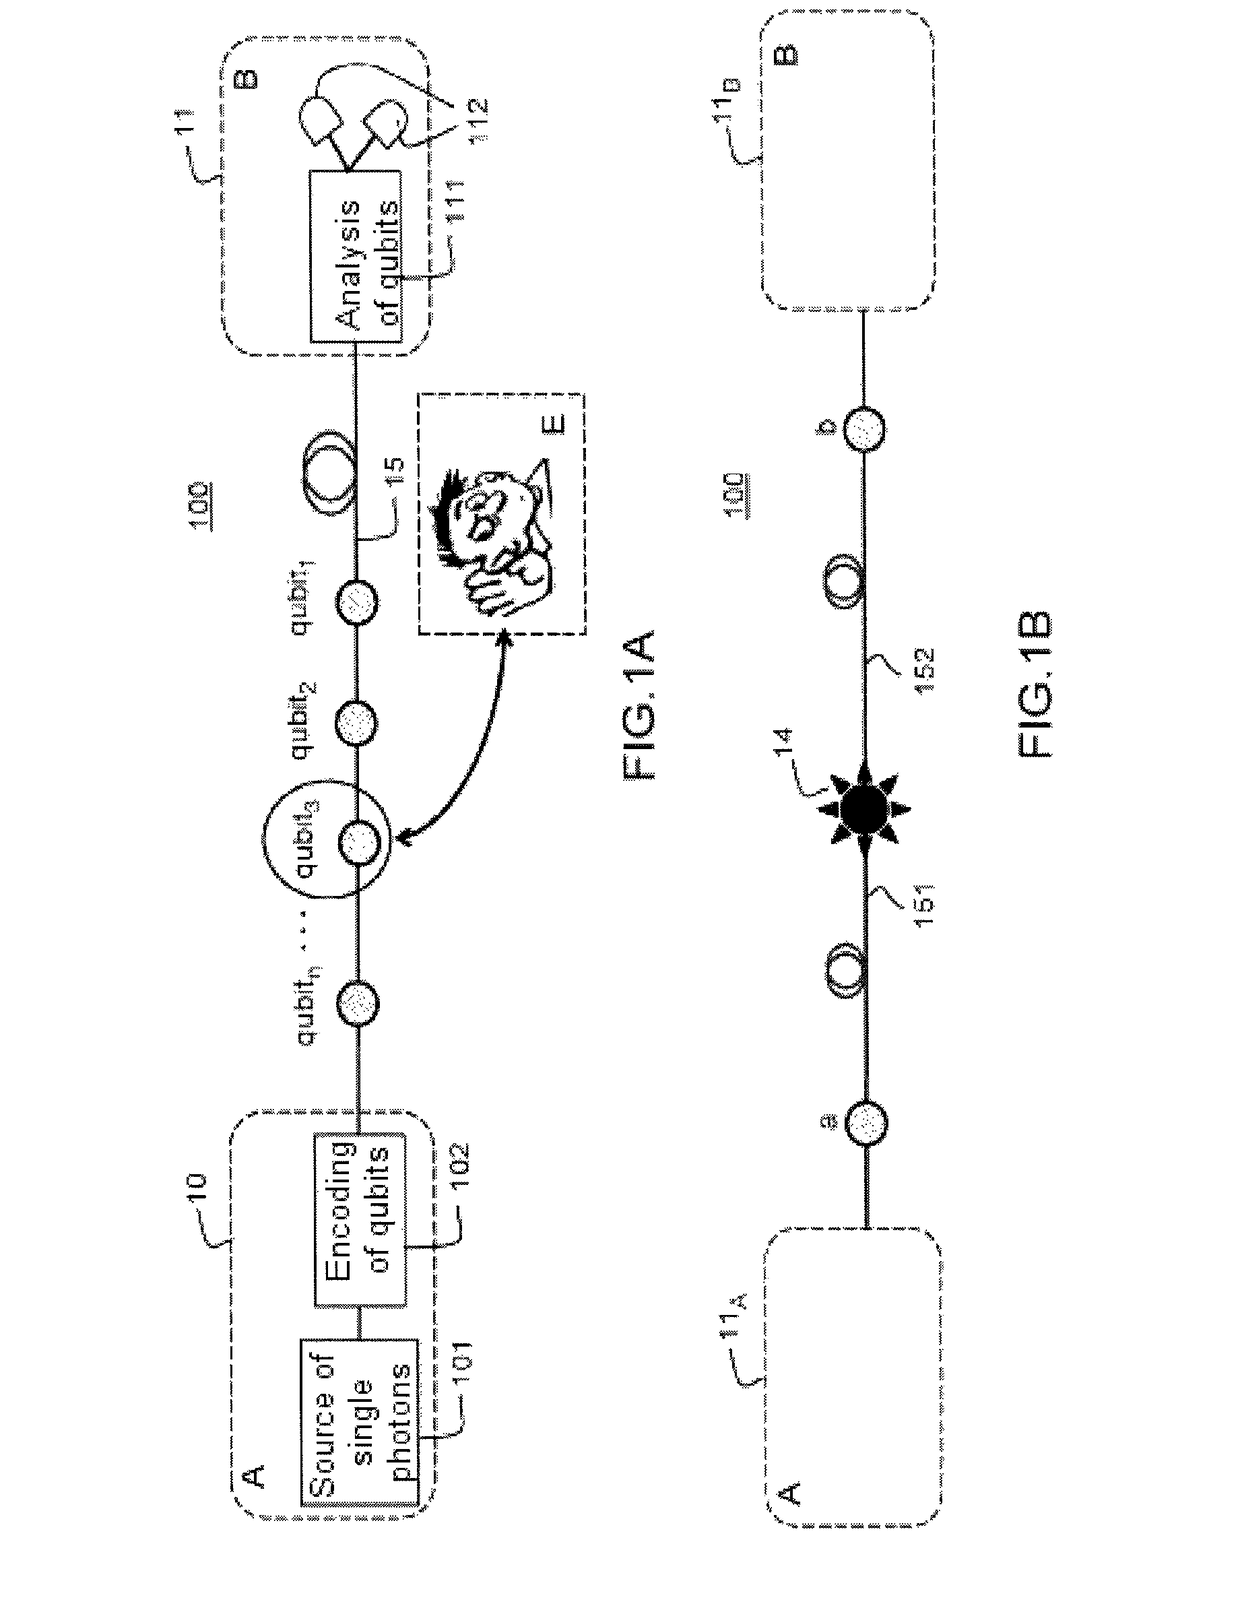 Method and device for synchronizing entanglement sources for a quantum communication network